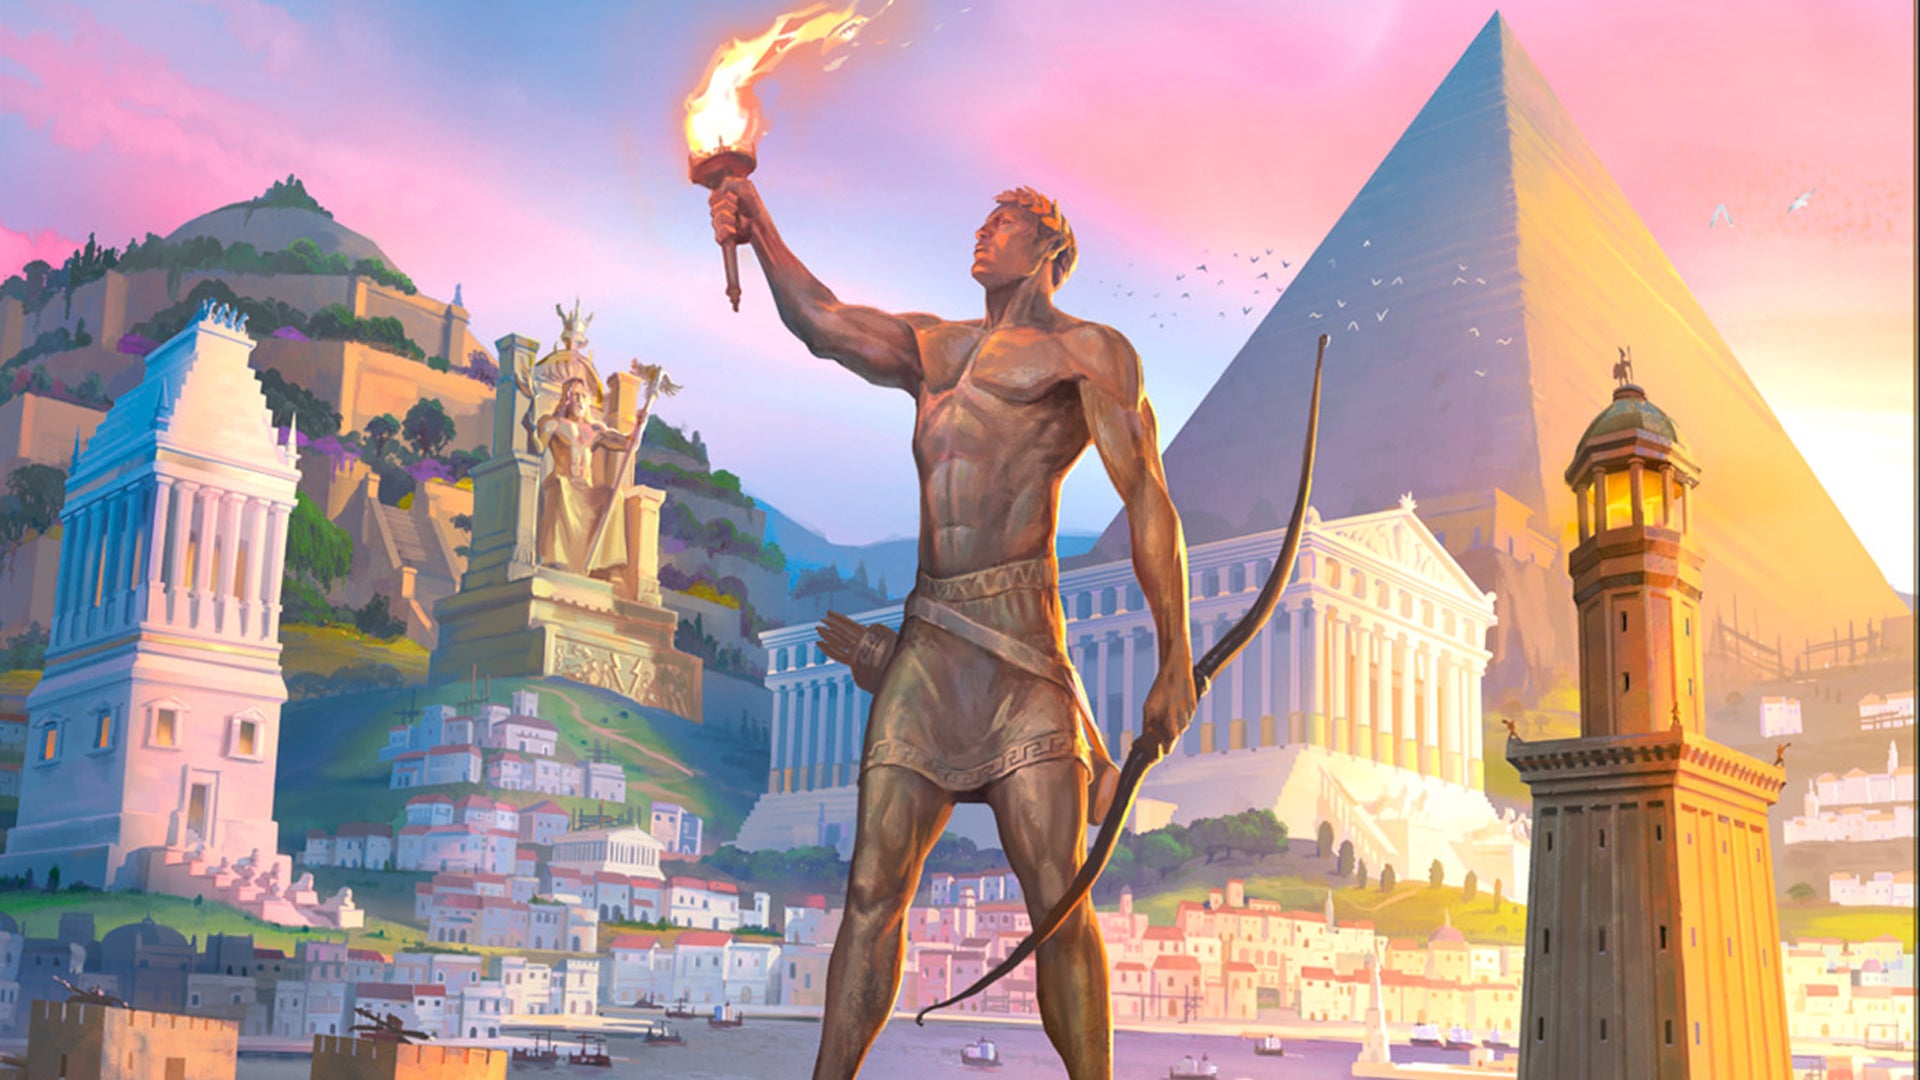 Image for 7 Wonders second edition announced, releasing this September